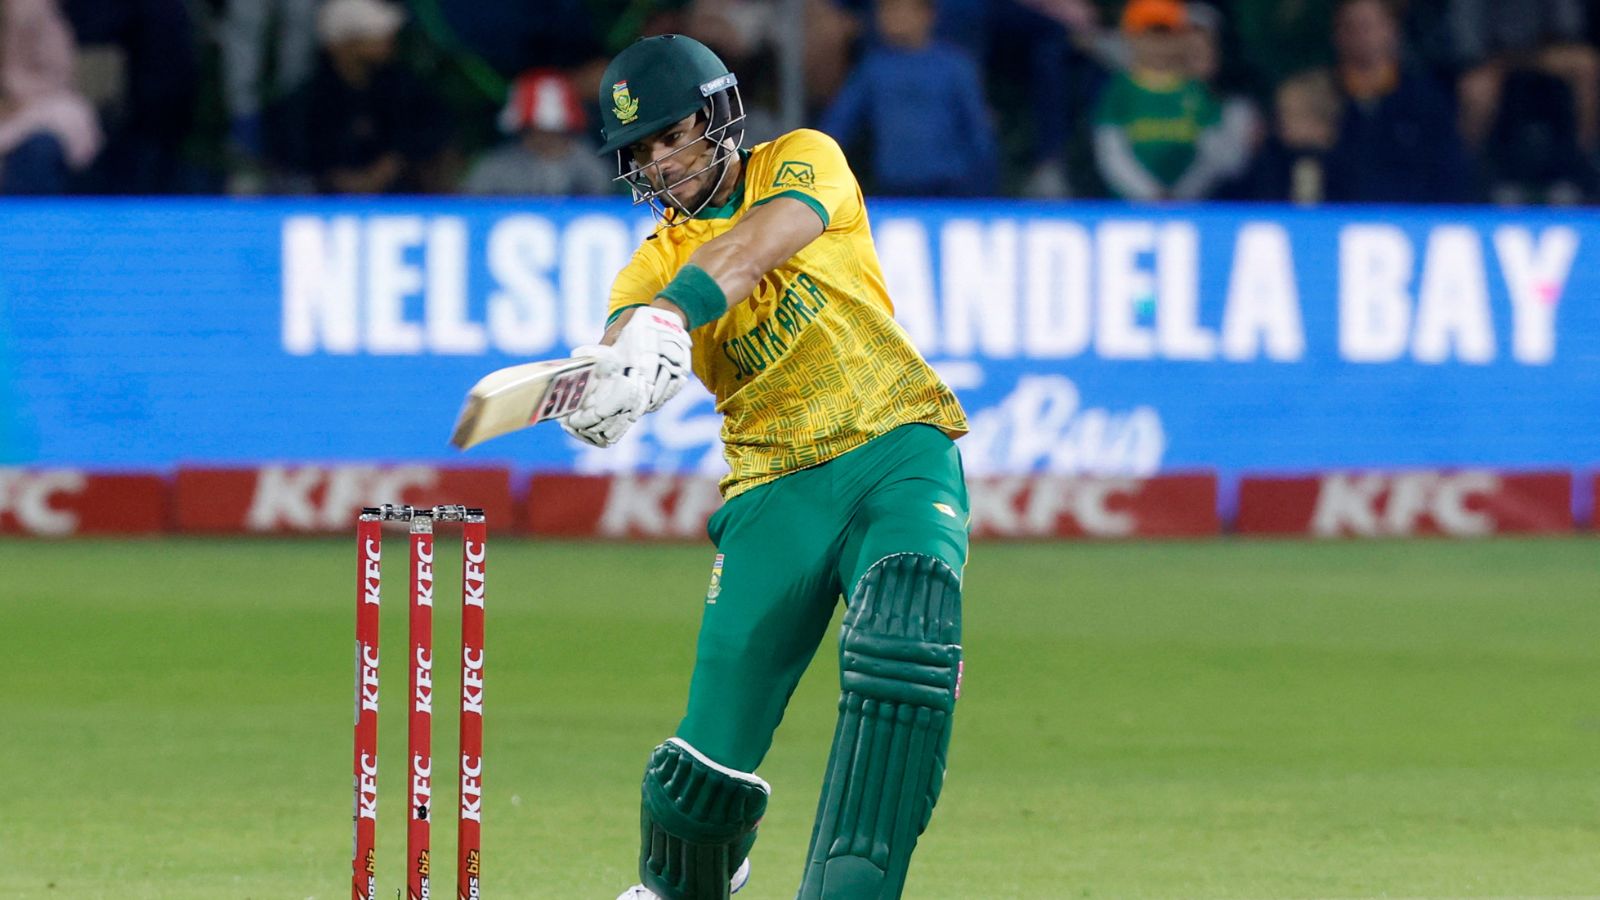 IND vs SA: Reeza Hendricks' onslaught takes South Africa to victory in rain-reduced second T20I | Cricket News - The Indian Express